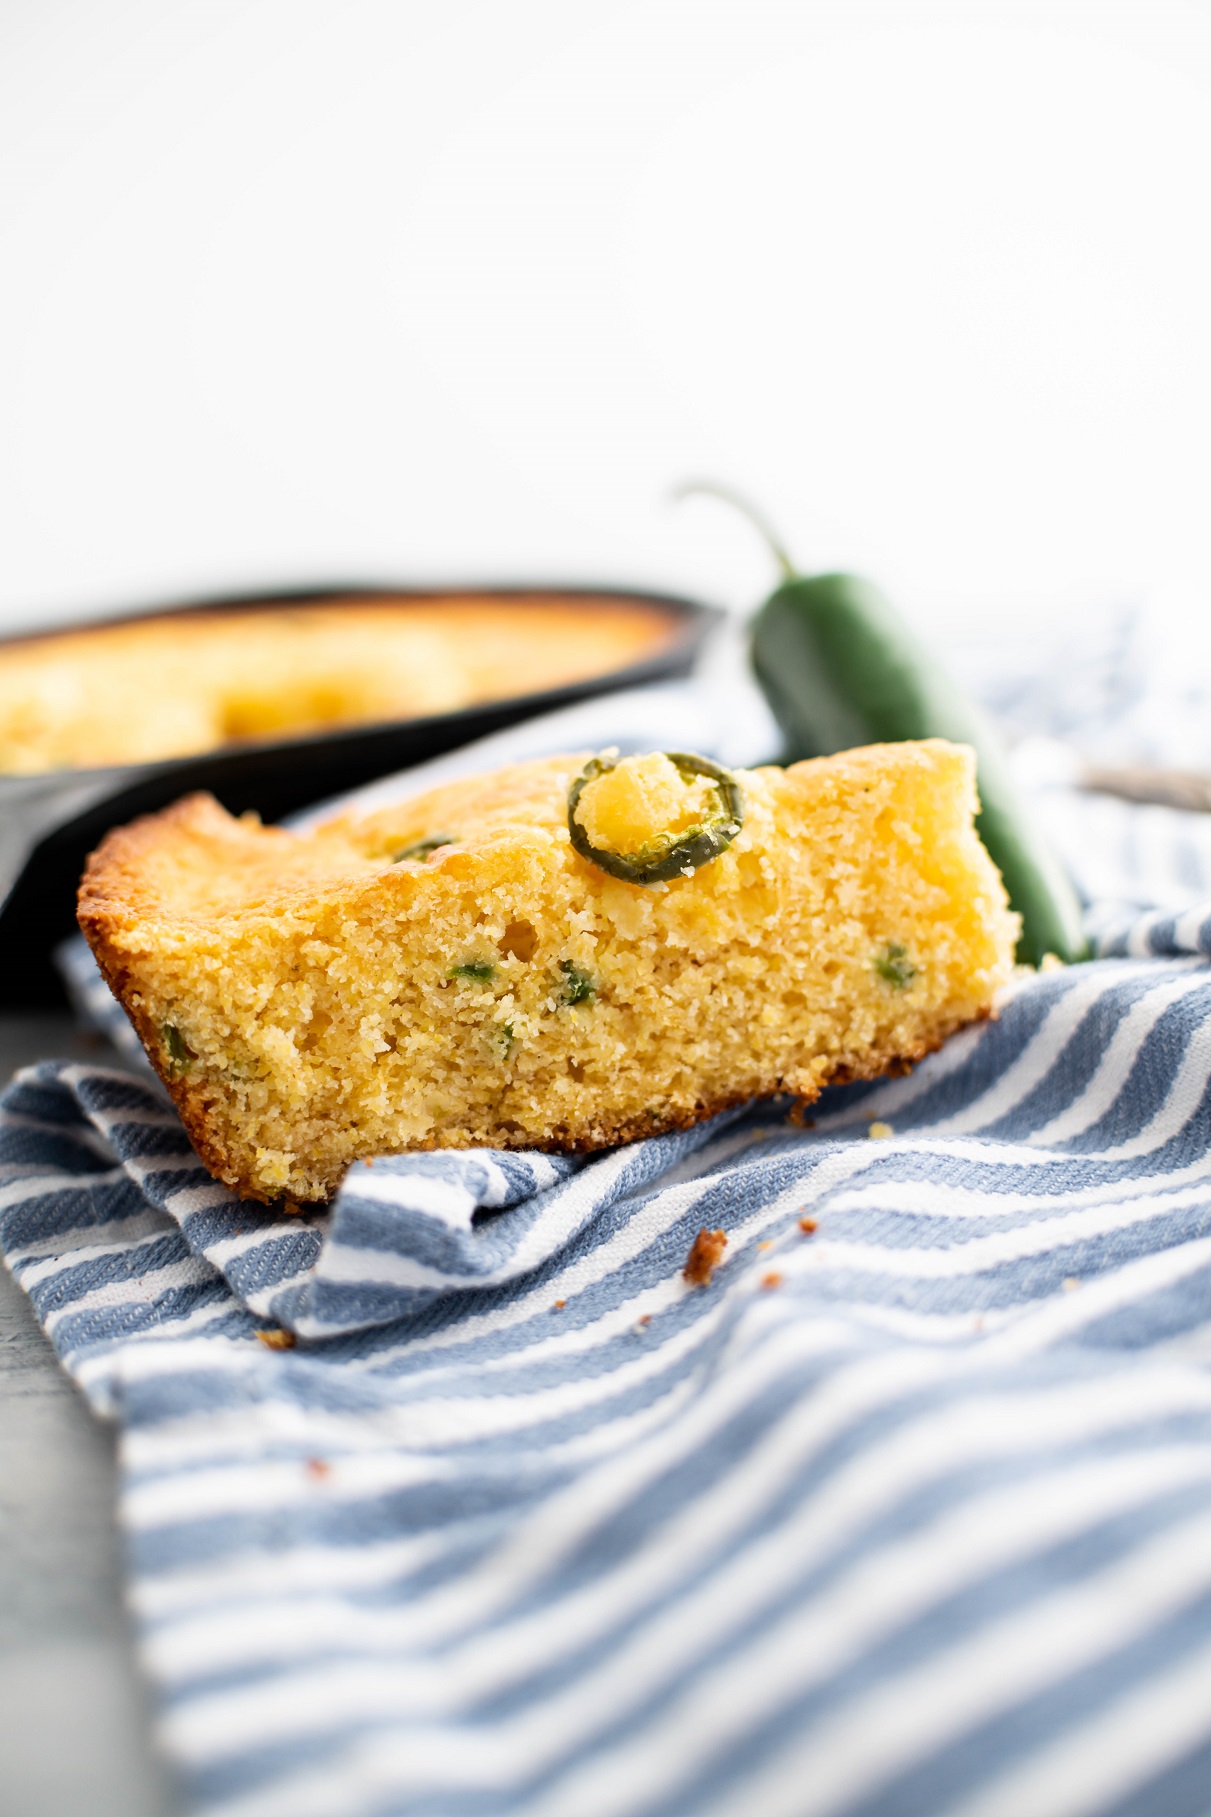 Slice of jalapeno cheddar cornbread on a blue and white striped cloth napkin with cast iron skillet of cornbread in background.